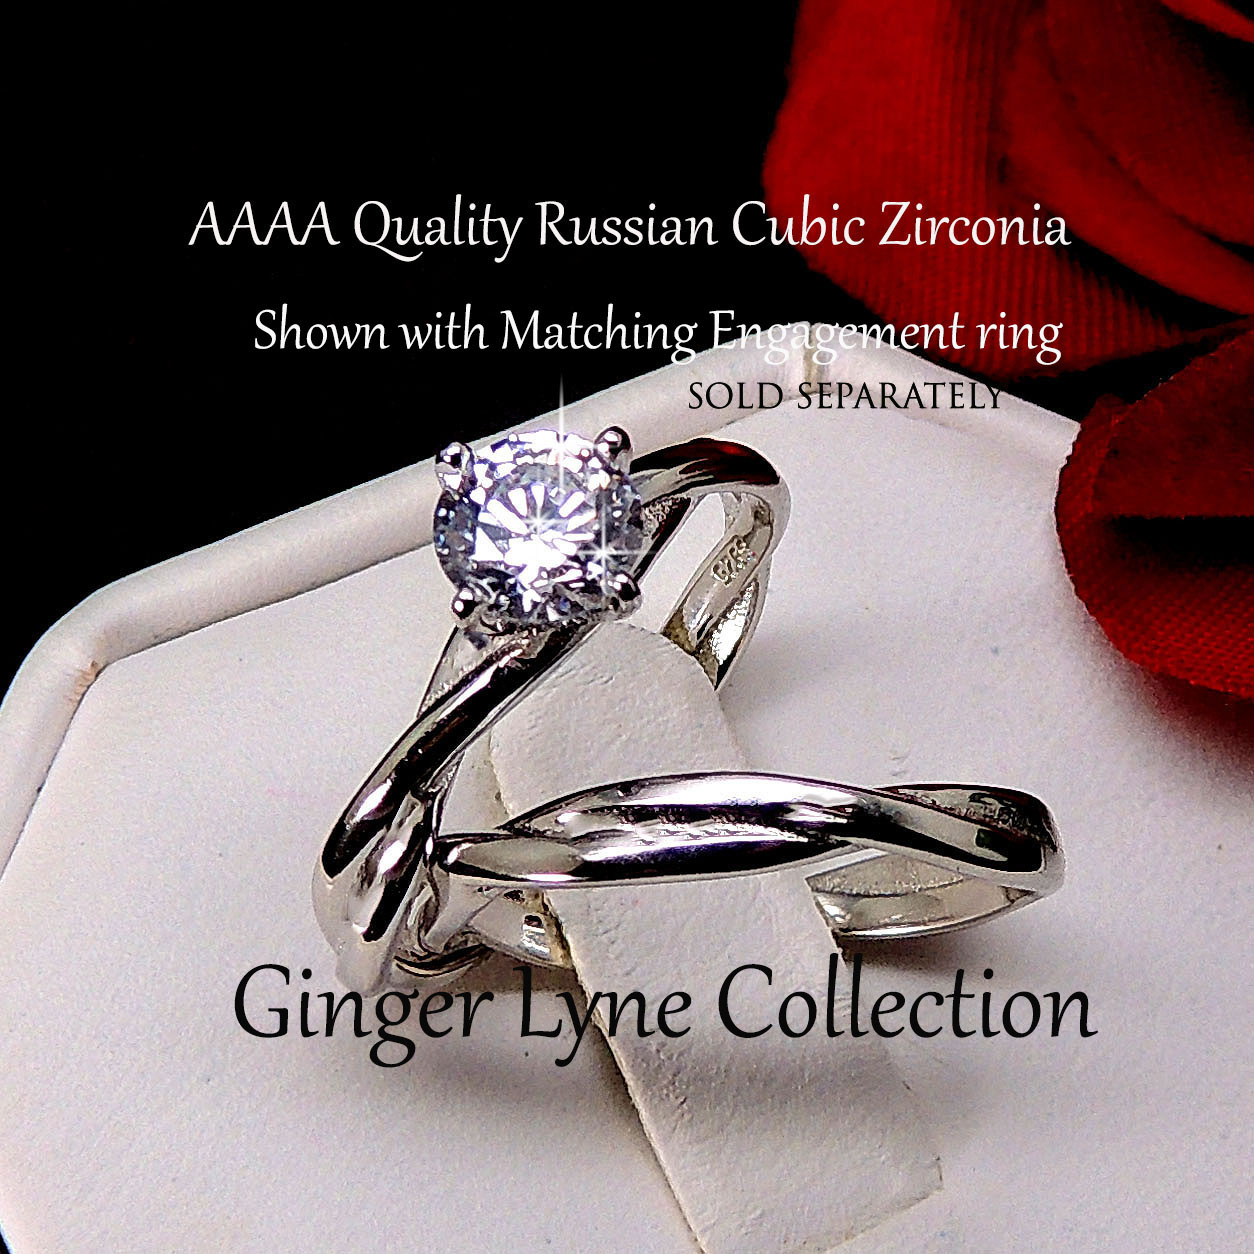 Aurora Wedding Band Ring Women Men Twist Sterling Silver Ginger Lyne Collection - image 4 of 7